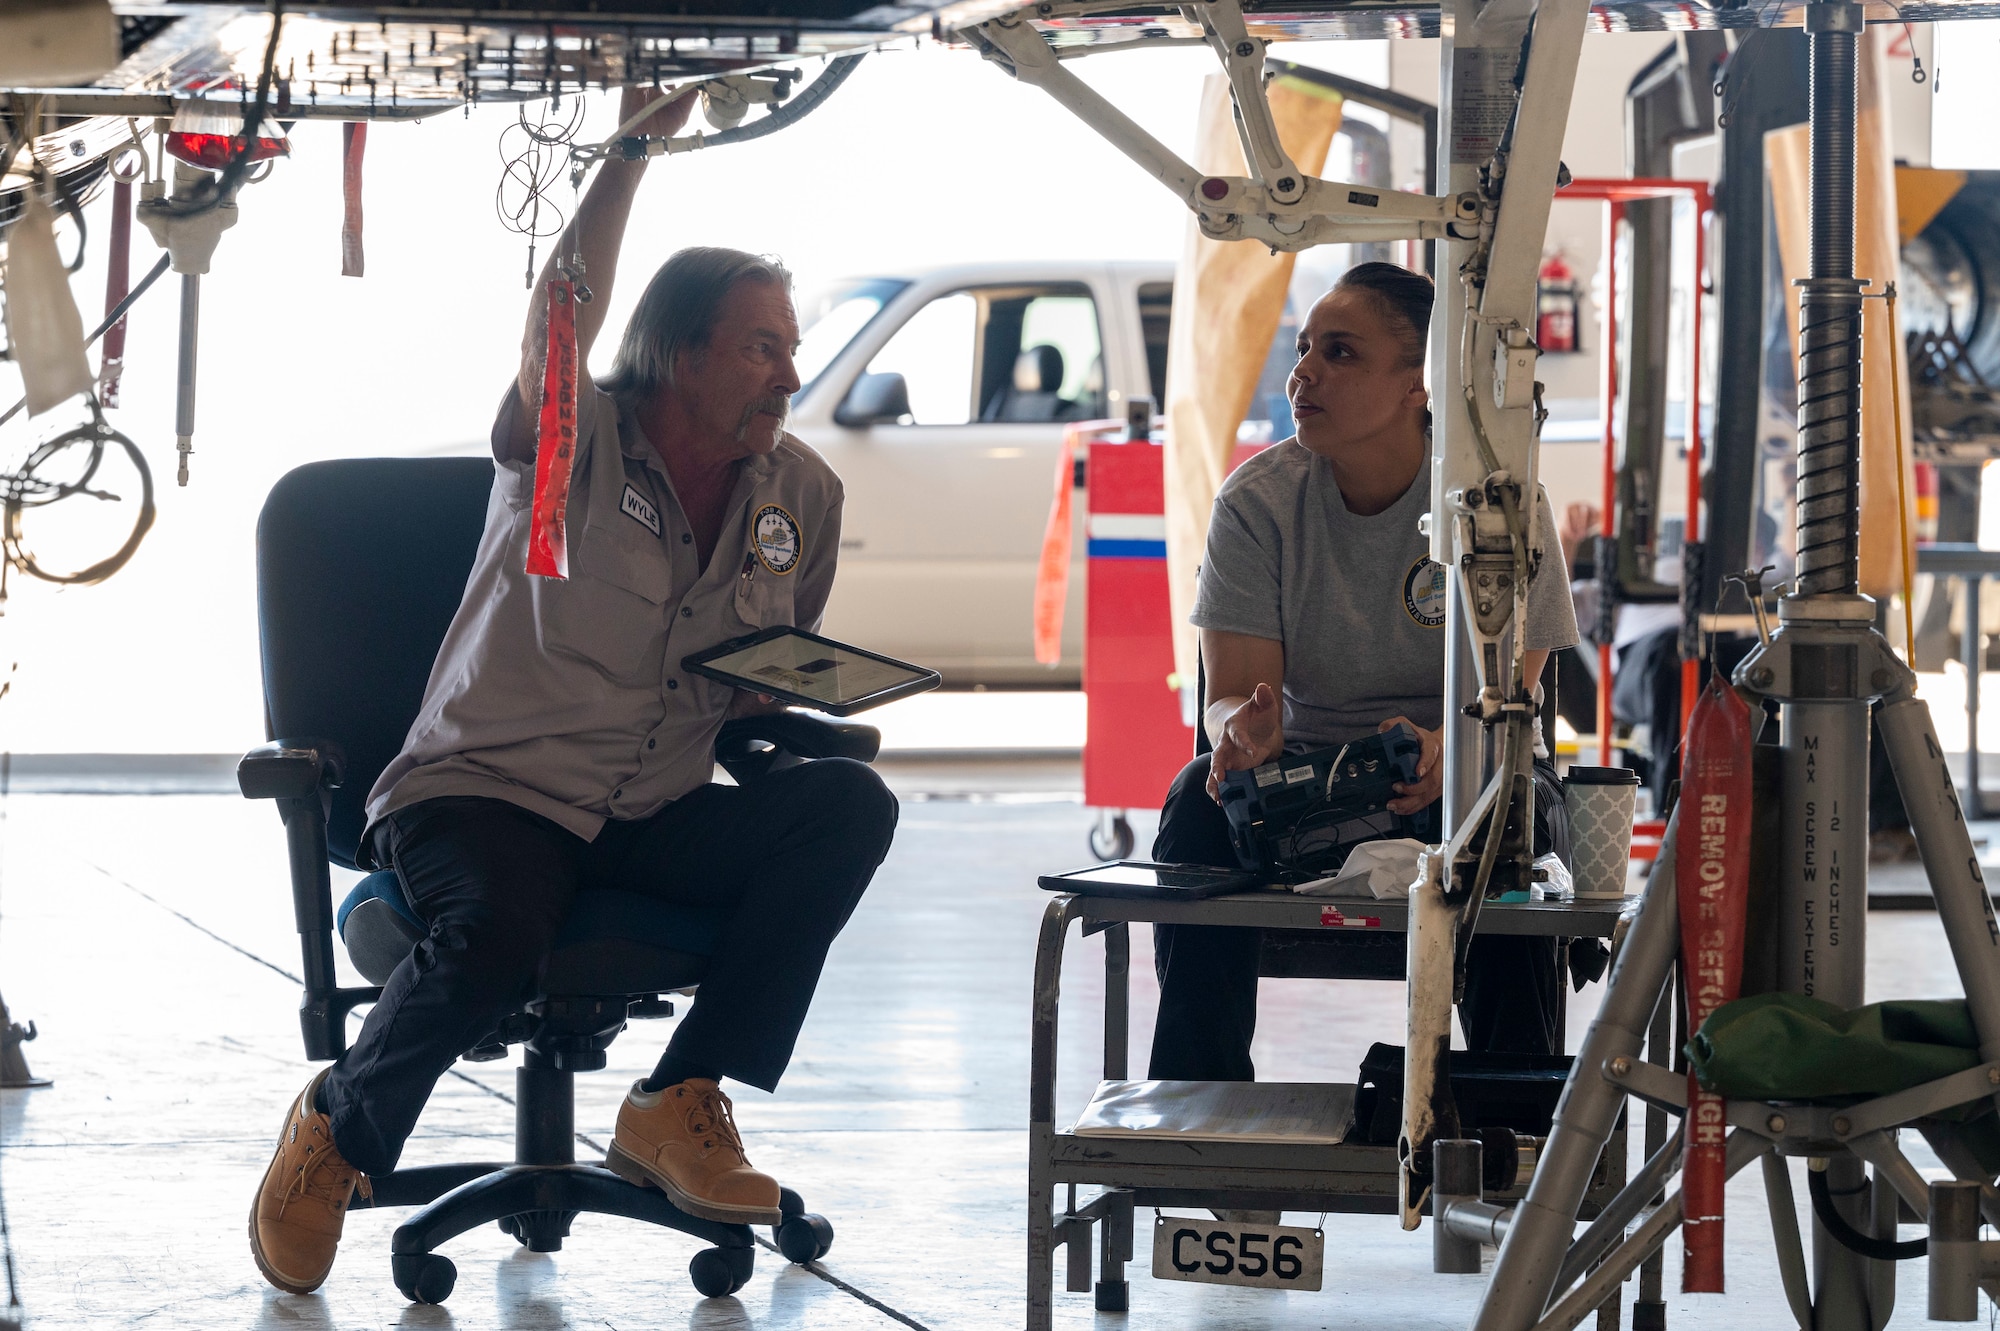 William Wylie, T-38 Aircraft Maintenance Program nondestructive inspection technician, left, and Alma Carrington, T-38 AMP NDI technician look over the technician orders for the T-38A/B Talon at Holloman Air Force Base, New Mexico, June 8, 2023.